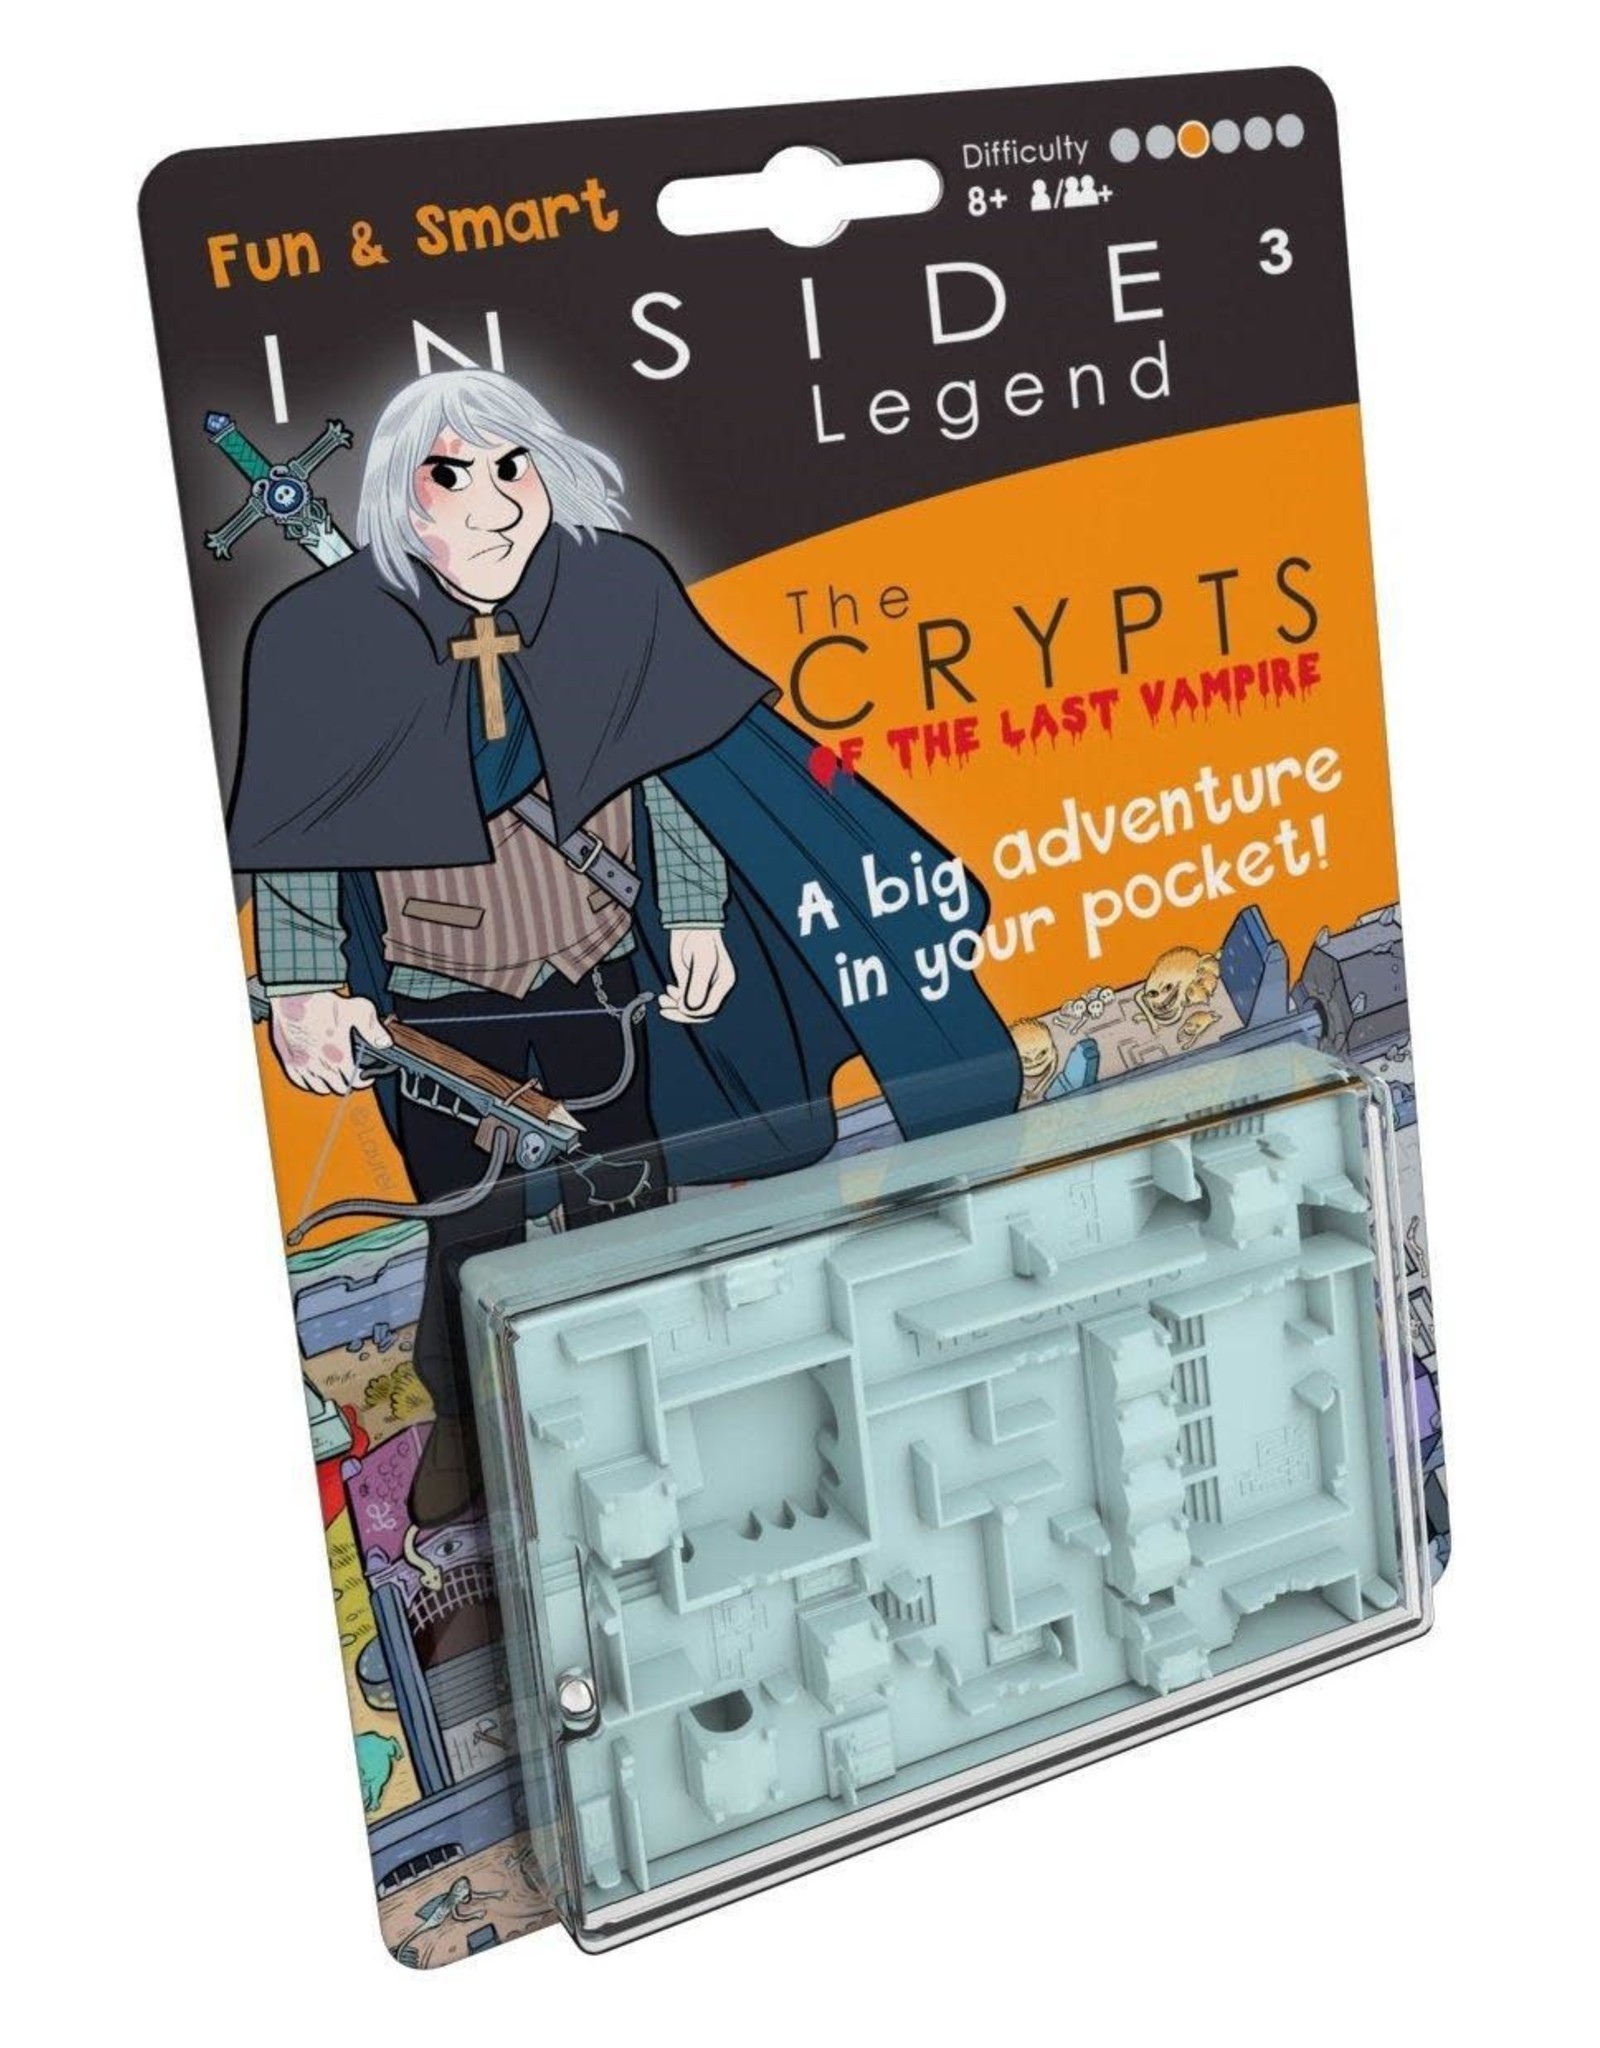 INSIDE 3 Legend: The Crypts of the Last Vampire